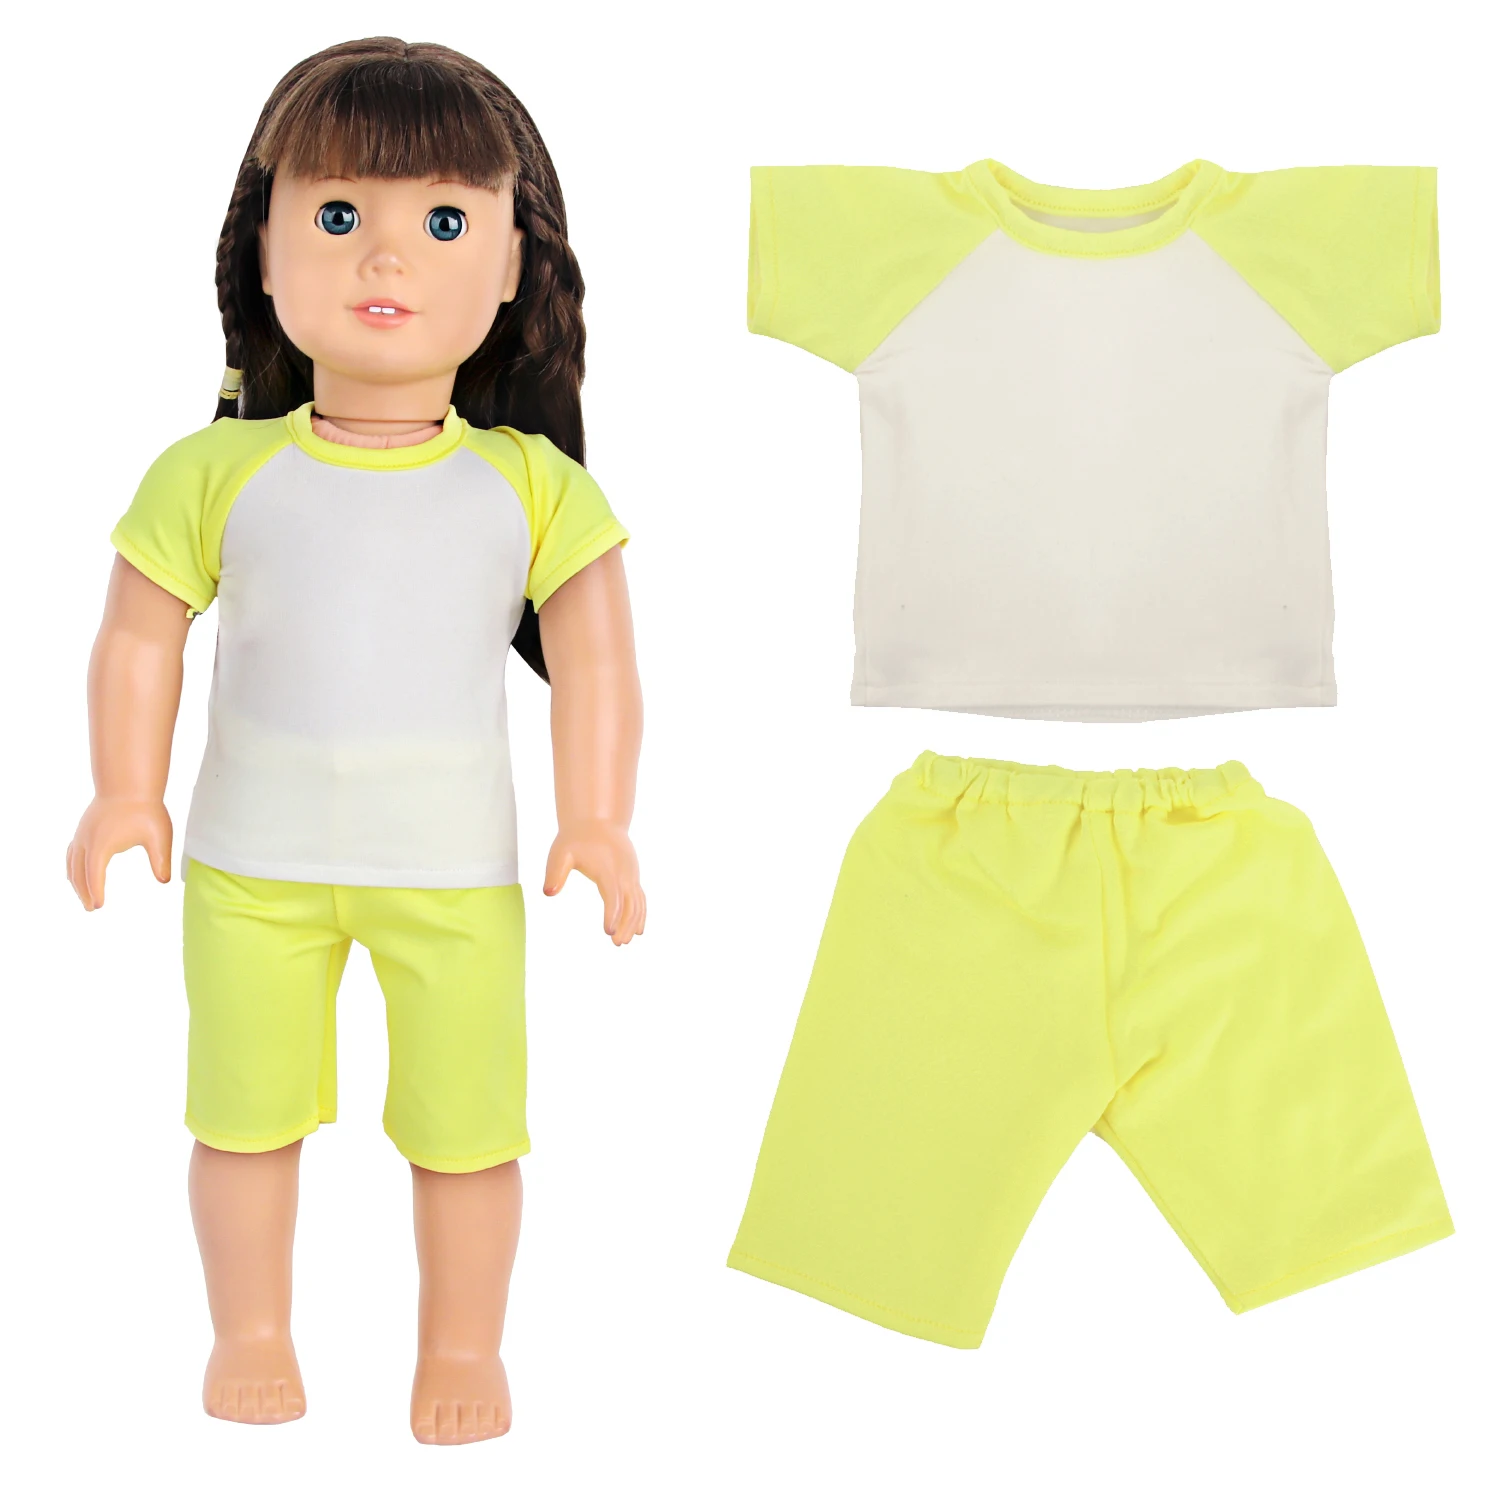 New arrival 18 inch doll clothes American doll girl pajamas